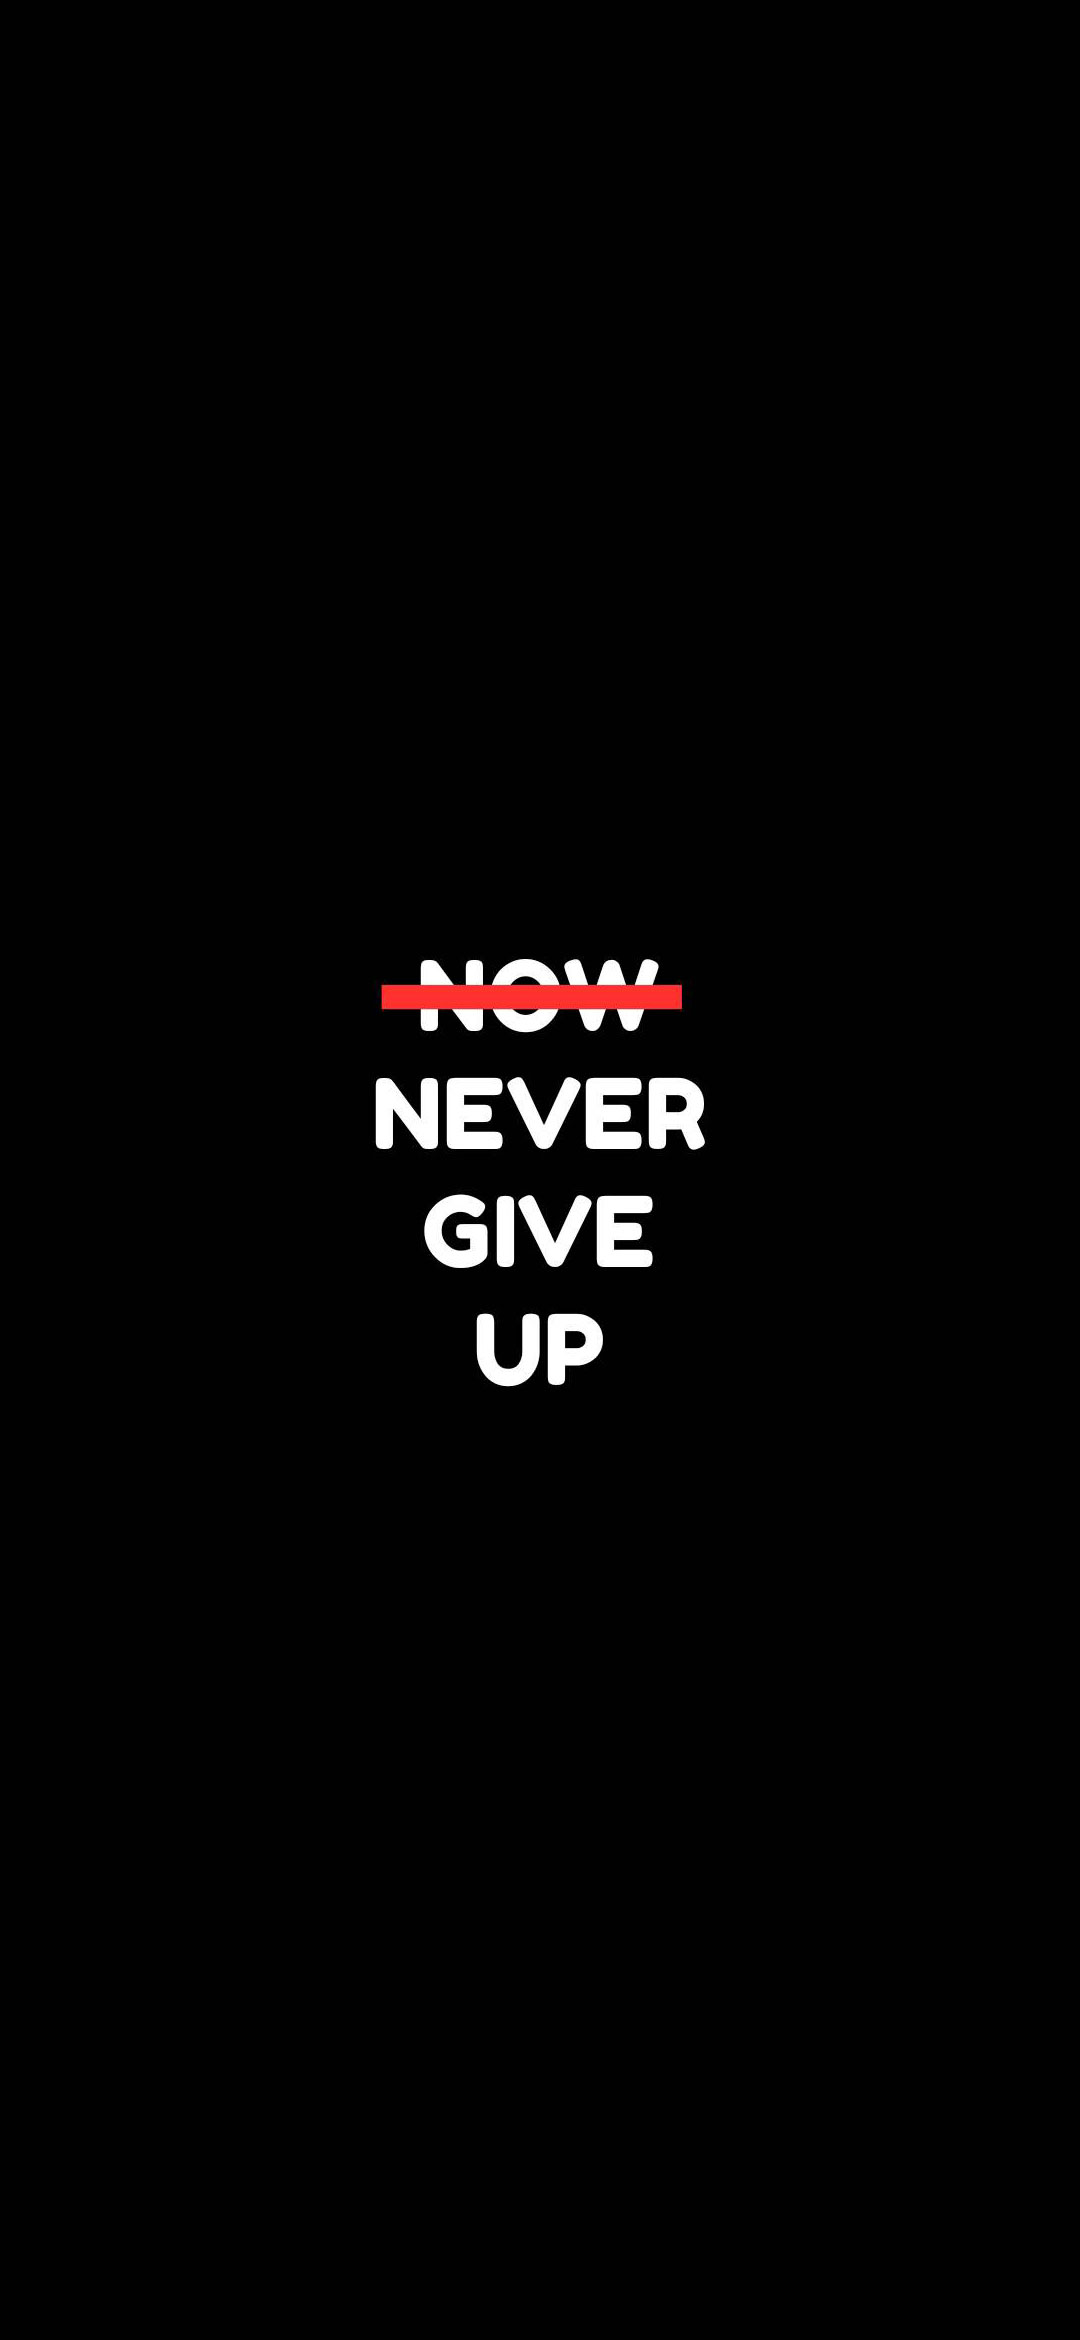 Never Give Up Ever IPhone Wallpaper  IPhone Wallpapers  iPhone Wallpapers